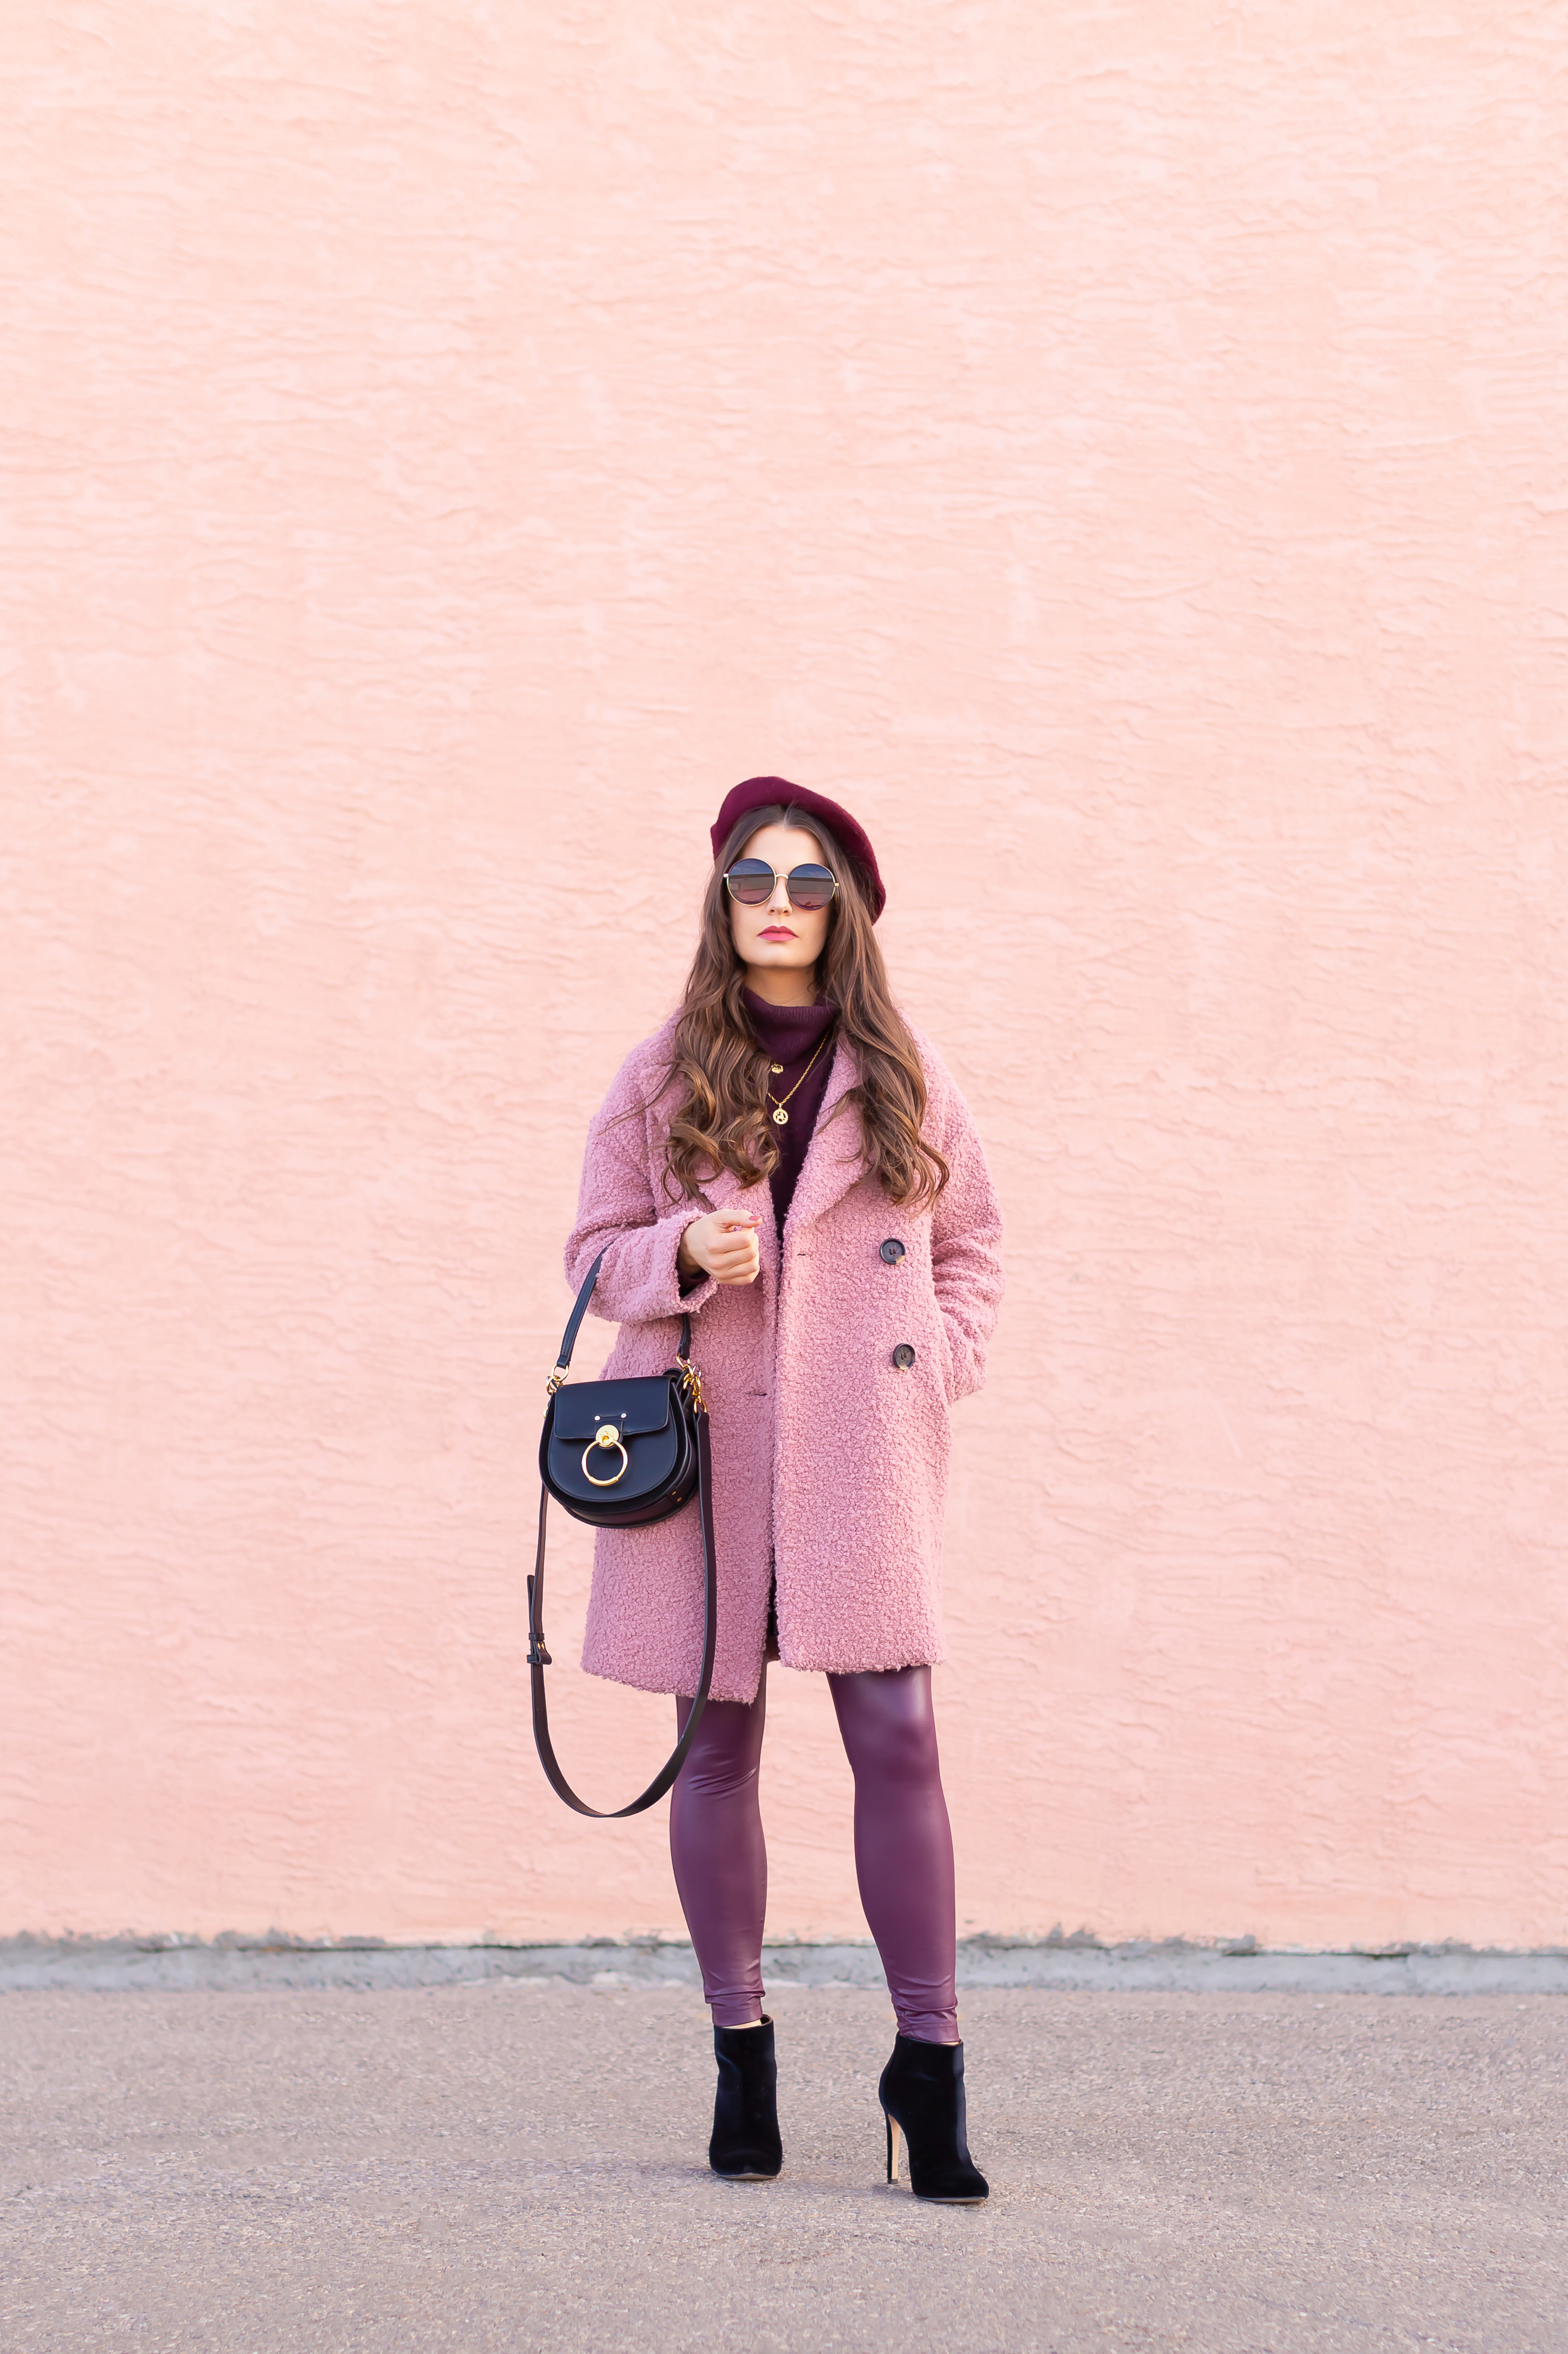 Raspberry Beret: My Favourite Warm, Comfortable Outfit Formula | Topshop Blush Teddy Coat Styled with a Wool Raspberry Beret, H&M burgundy sweater, Burgundy Joe Fresh Leather Leggings, Velvet Ankle Booties and the Artisan Anything Lara Leather Crossbody In Black (Amazing Chloe Tess Dupe!)  | Stylish Winter 2019 Outfit Ideas | Valentine’s Day Outfit Ideas for Cool Climates // Calgary, Alberta, Canada Fashion & Lifestyle Blogger // JustineCelina.com